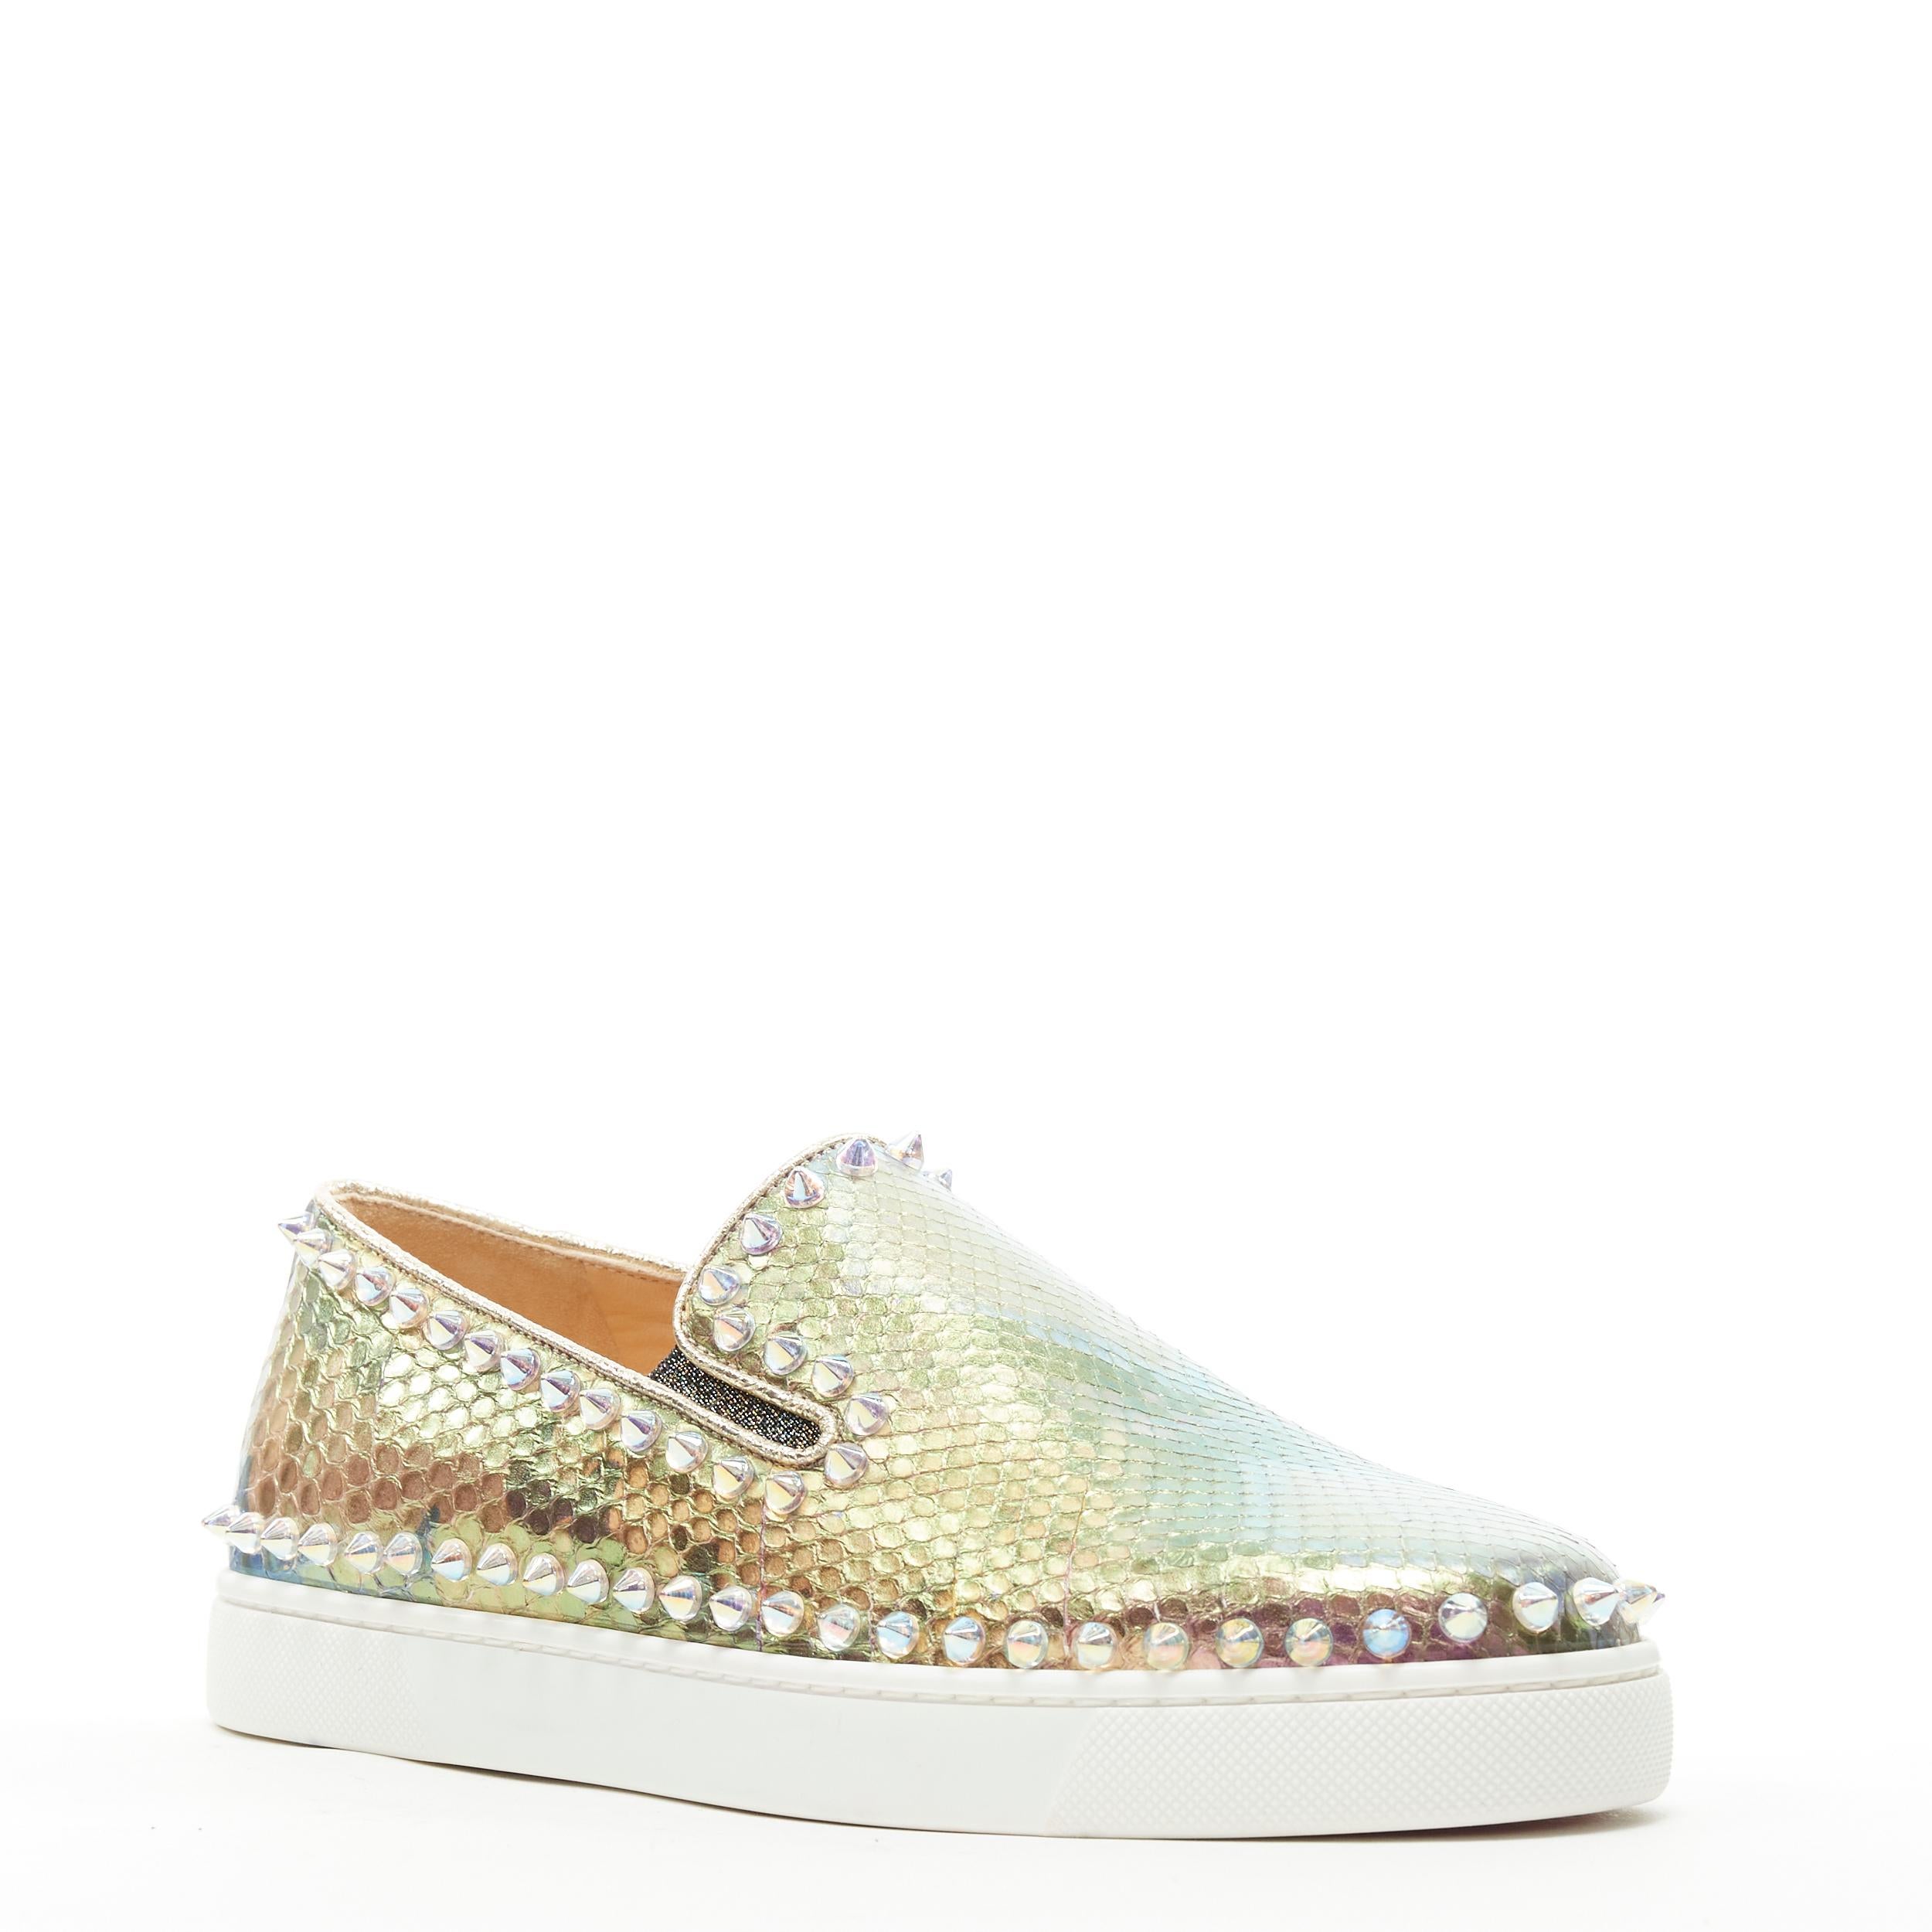 new CHRISTIAN LOUBOUTIN Pik Boat iridescent leather spike stud sneaker EU37 
Reference: TGAS/B00732 
Brand: Christian Louboutin 
Designer: Christian Louboutin 
Model: Pik Boat python 
Material: Leather 
Color: Green 
Pattern: Solid Extra Detail: